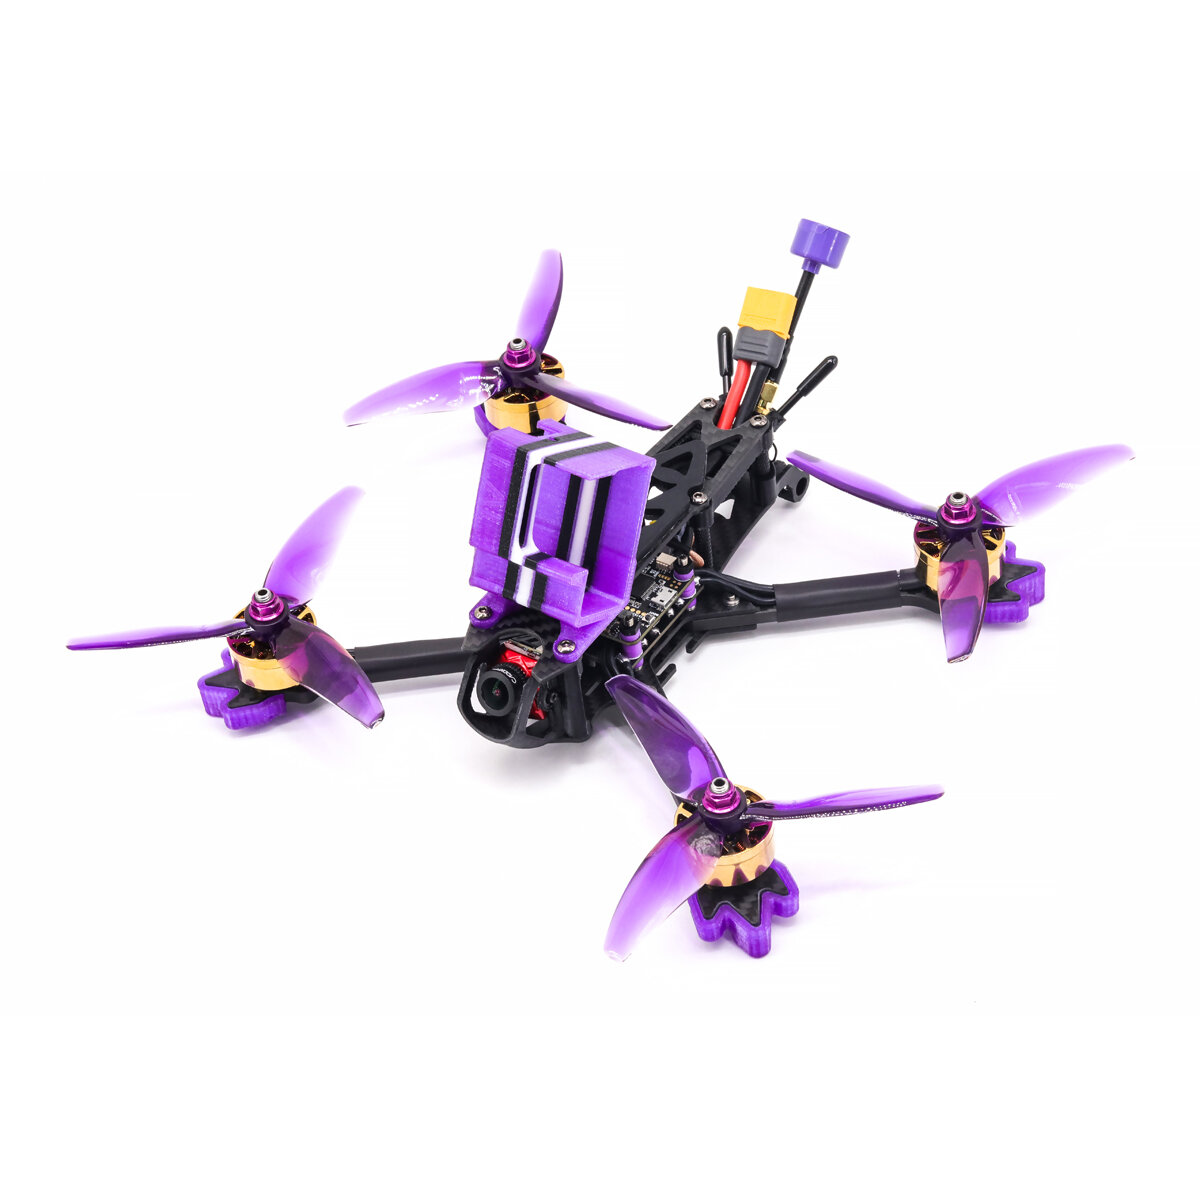 Eachine LAL 5style 220mm 5